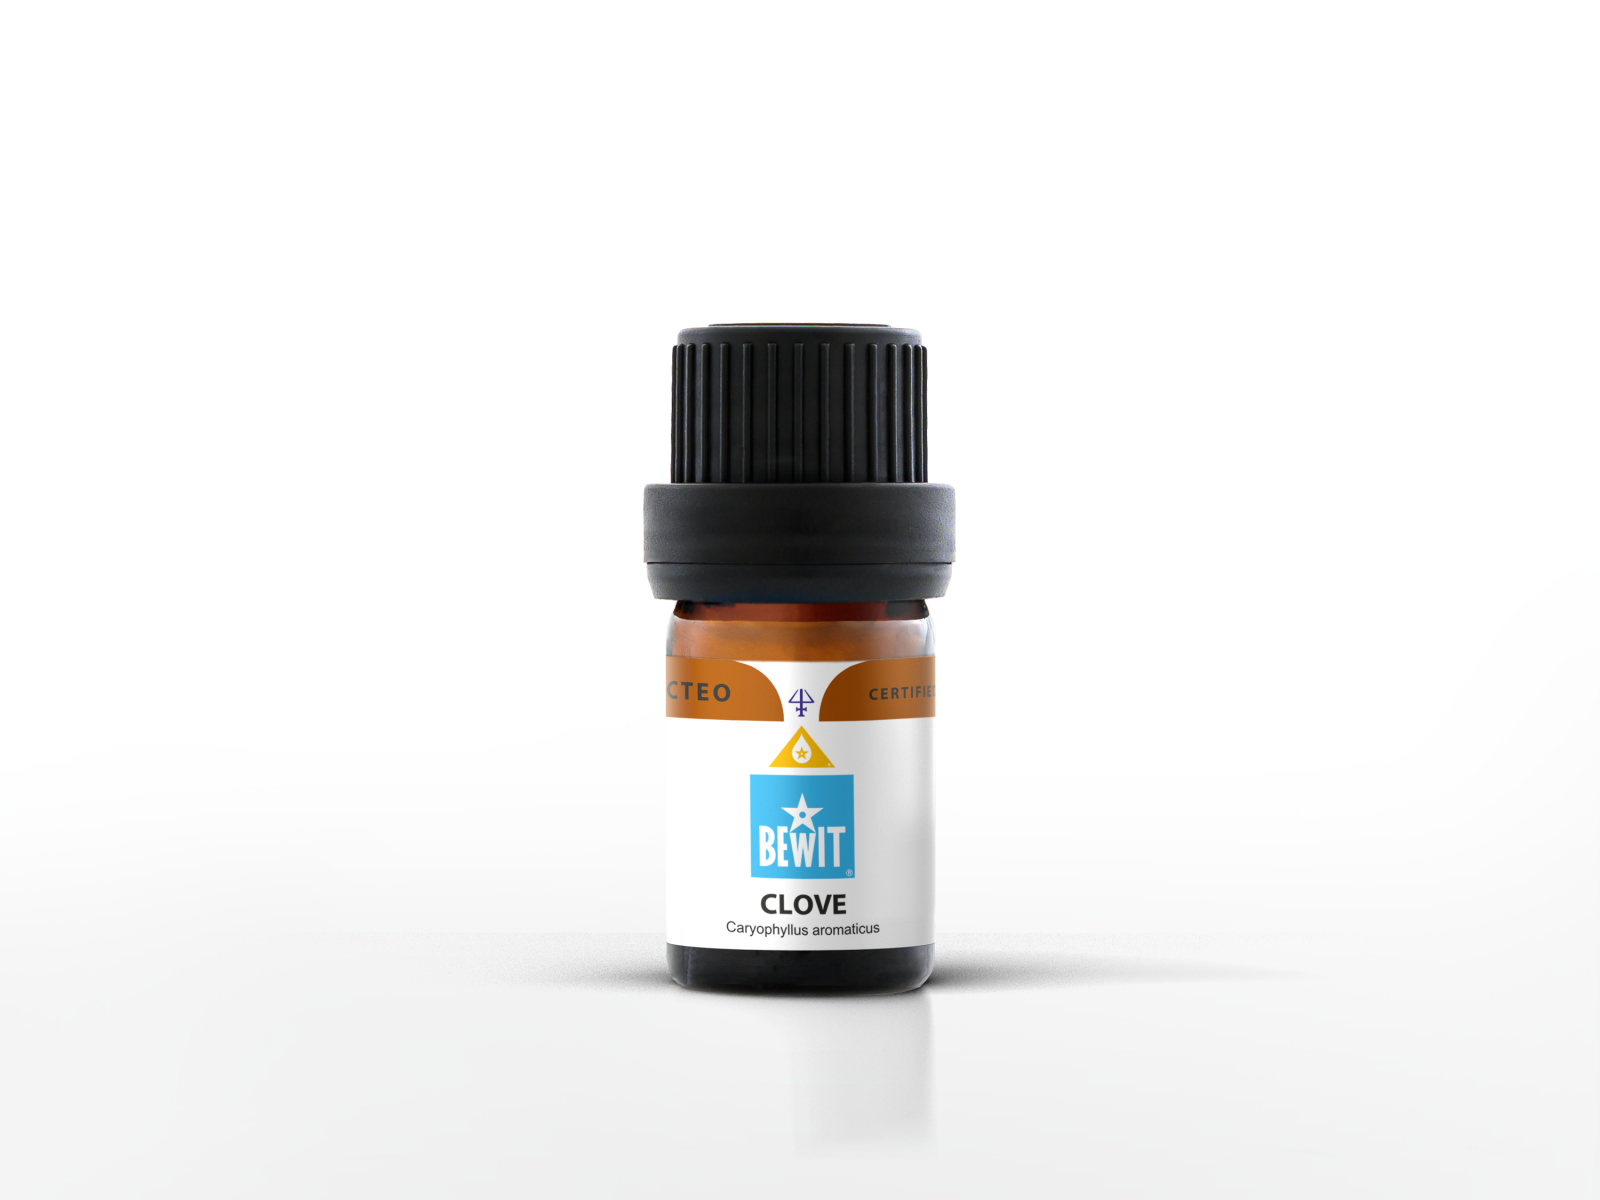 BEWIT Clove - It is a 100% pure essential oil - 4